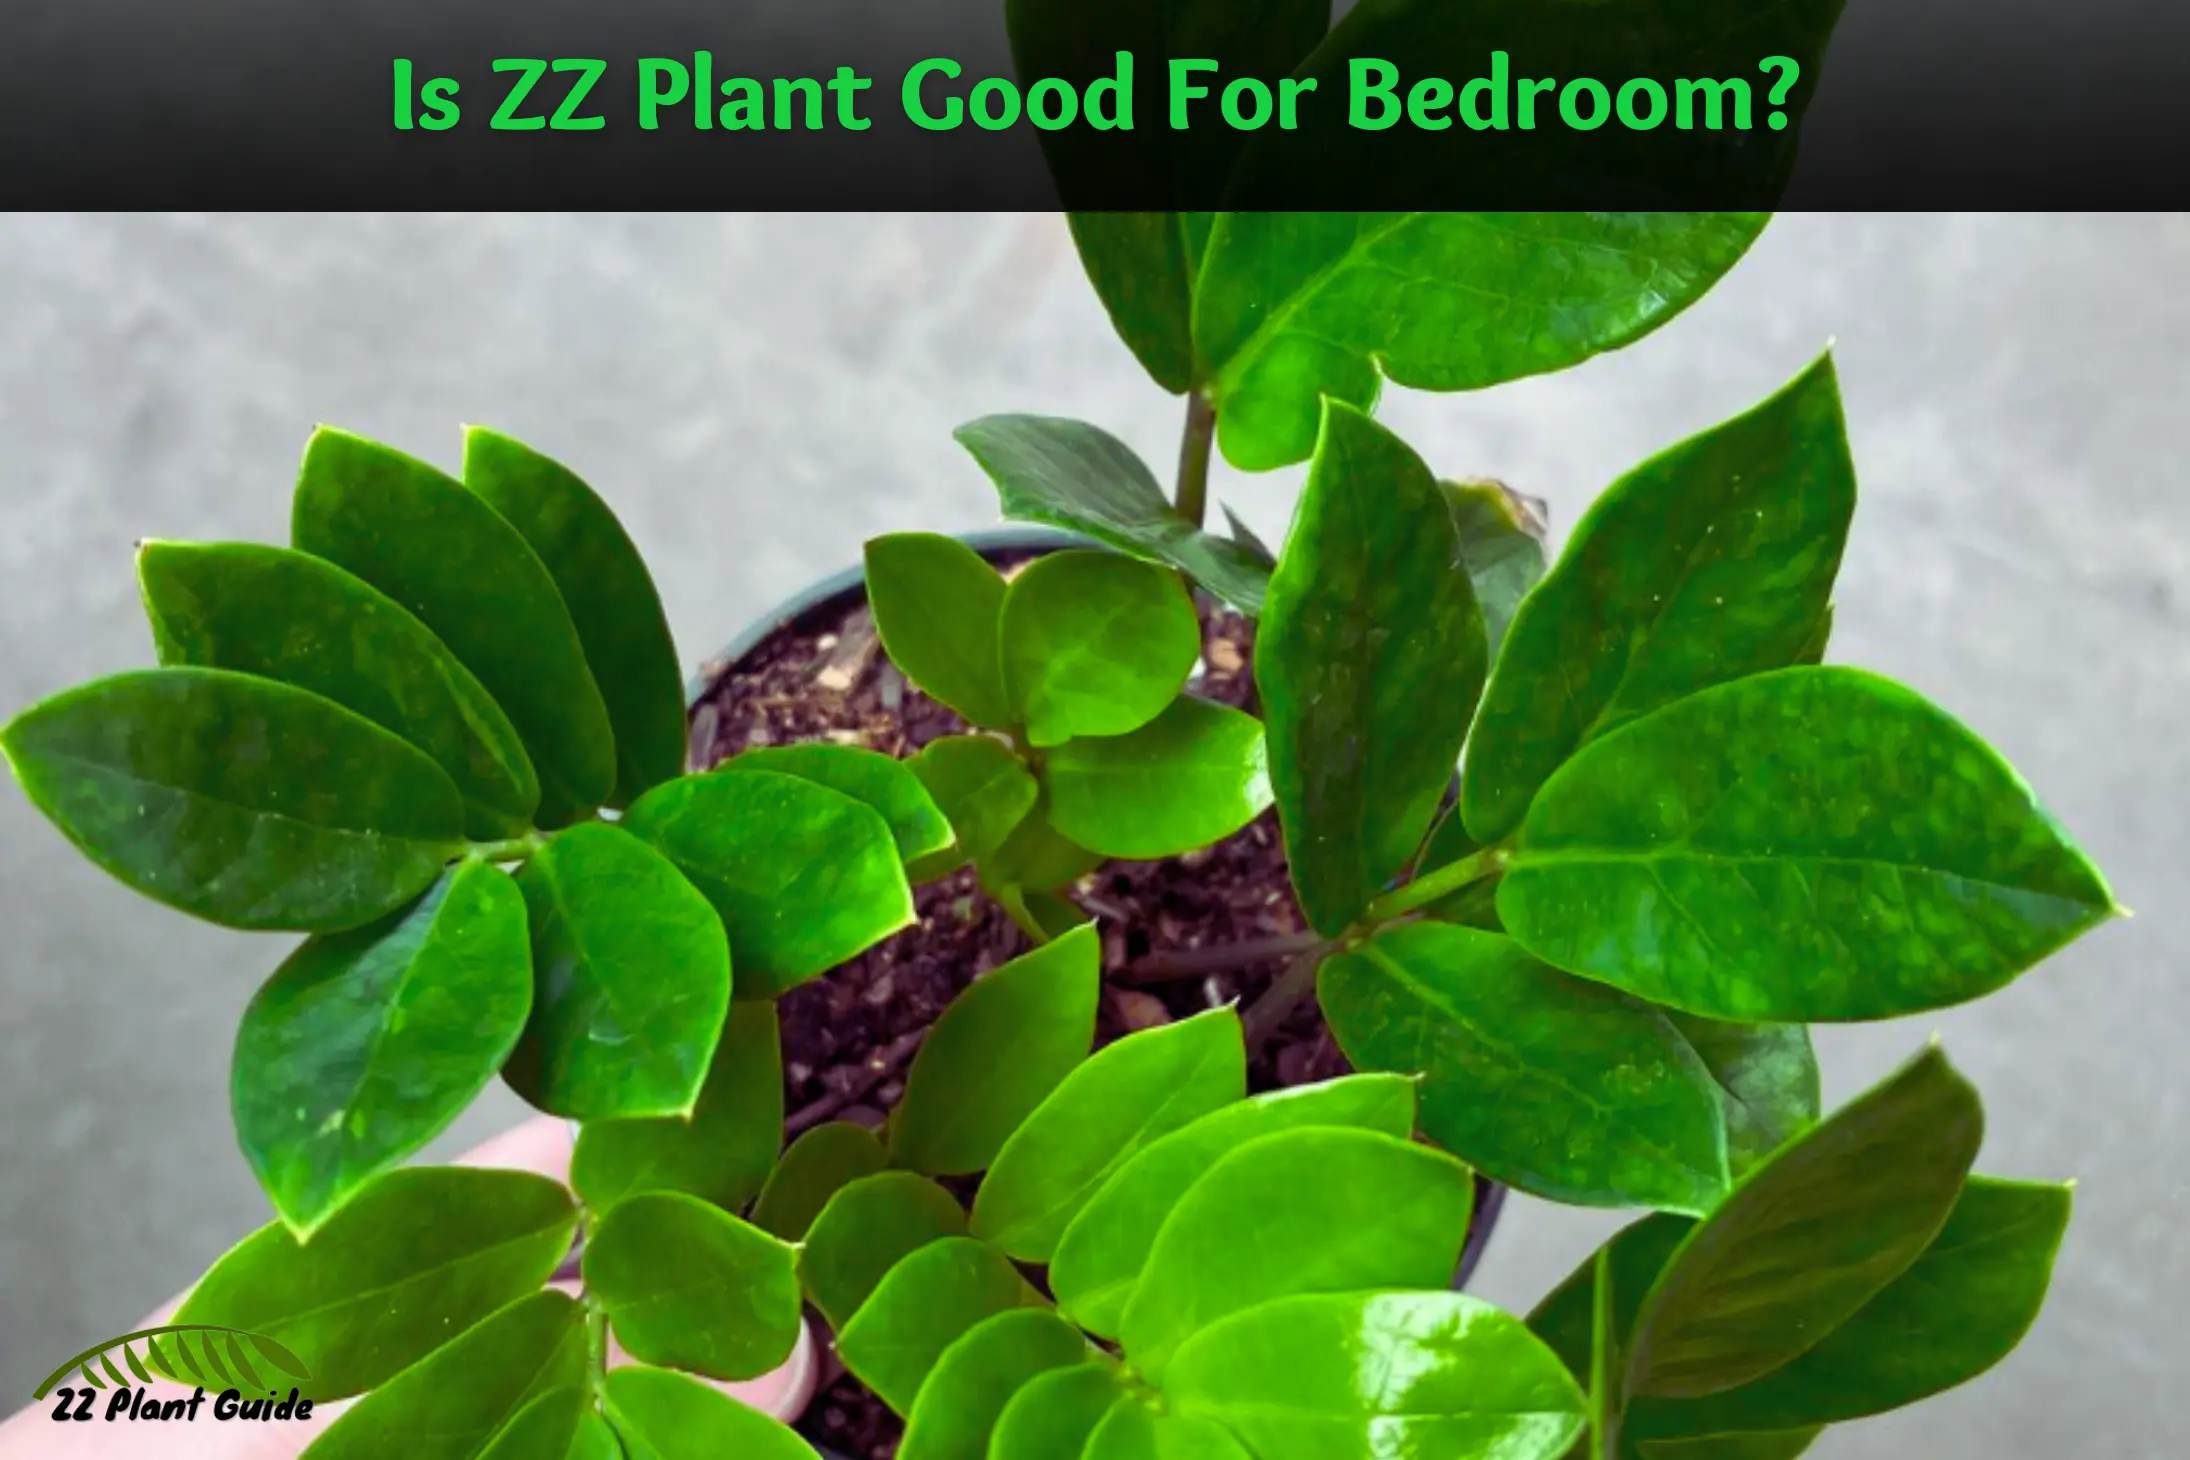 Is ZZ Plant Good For Bedroom